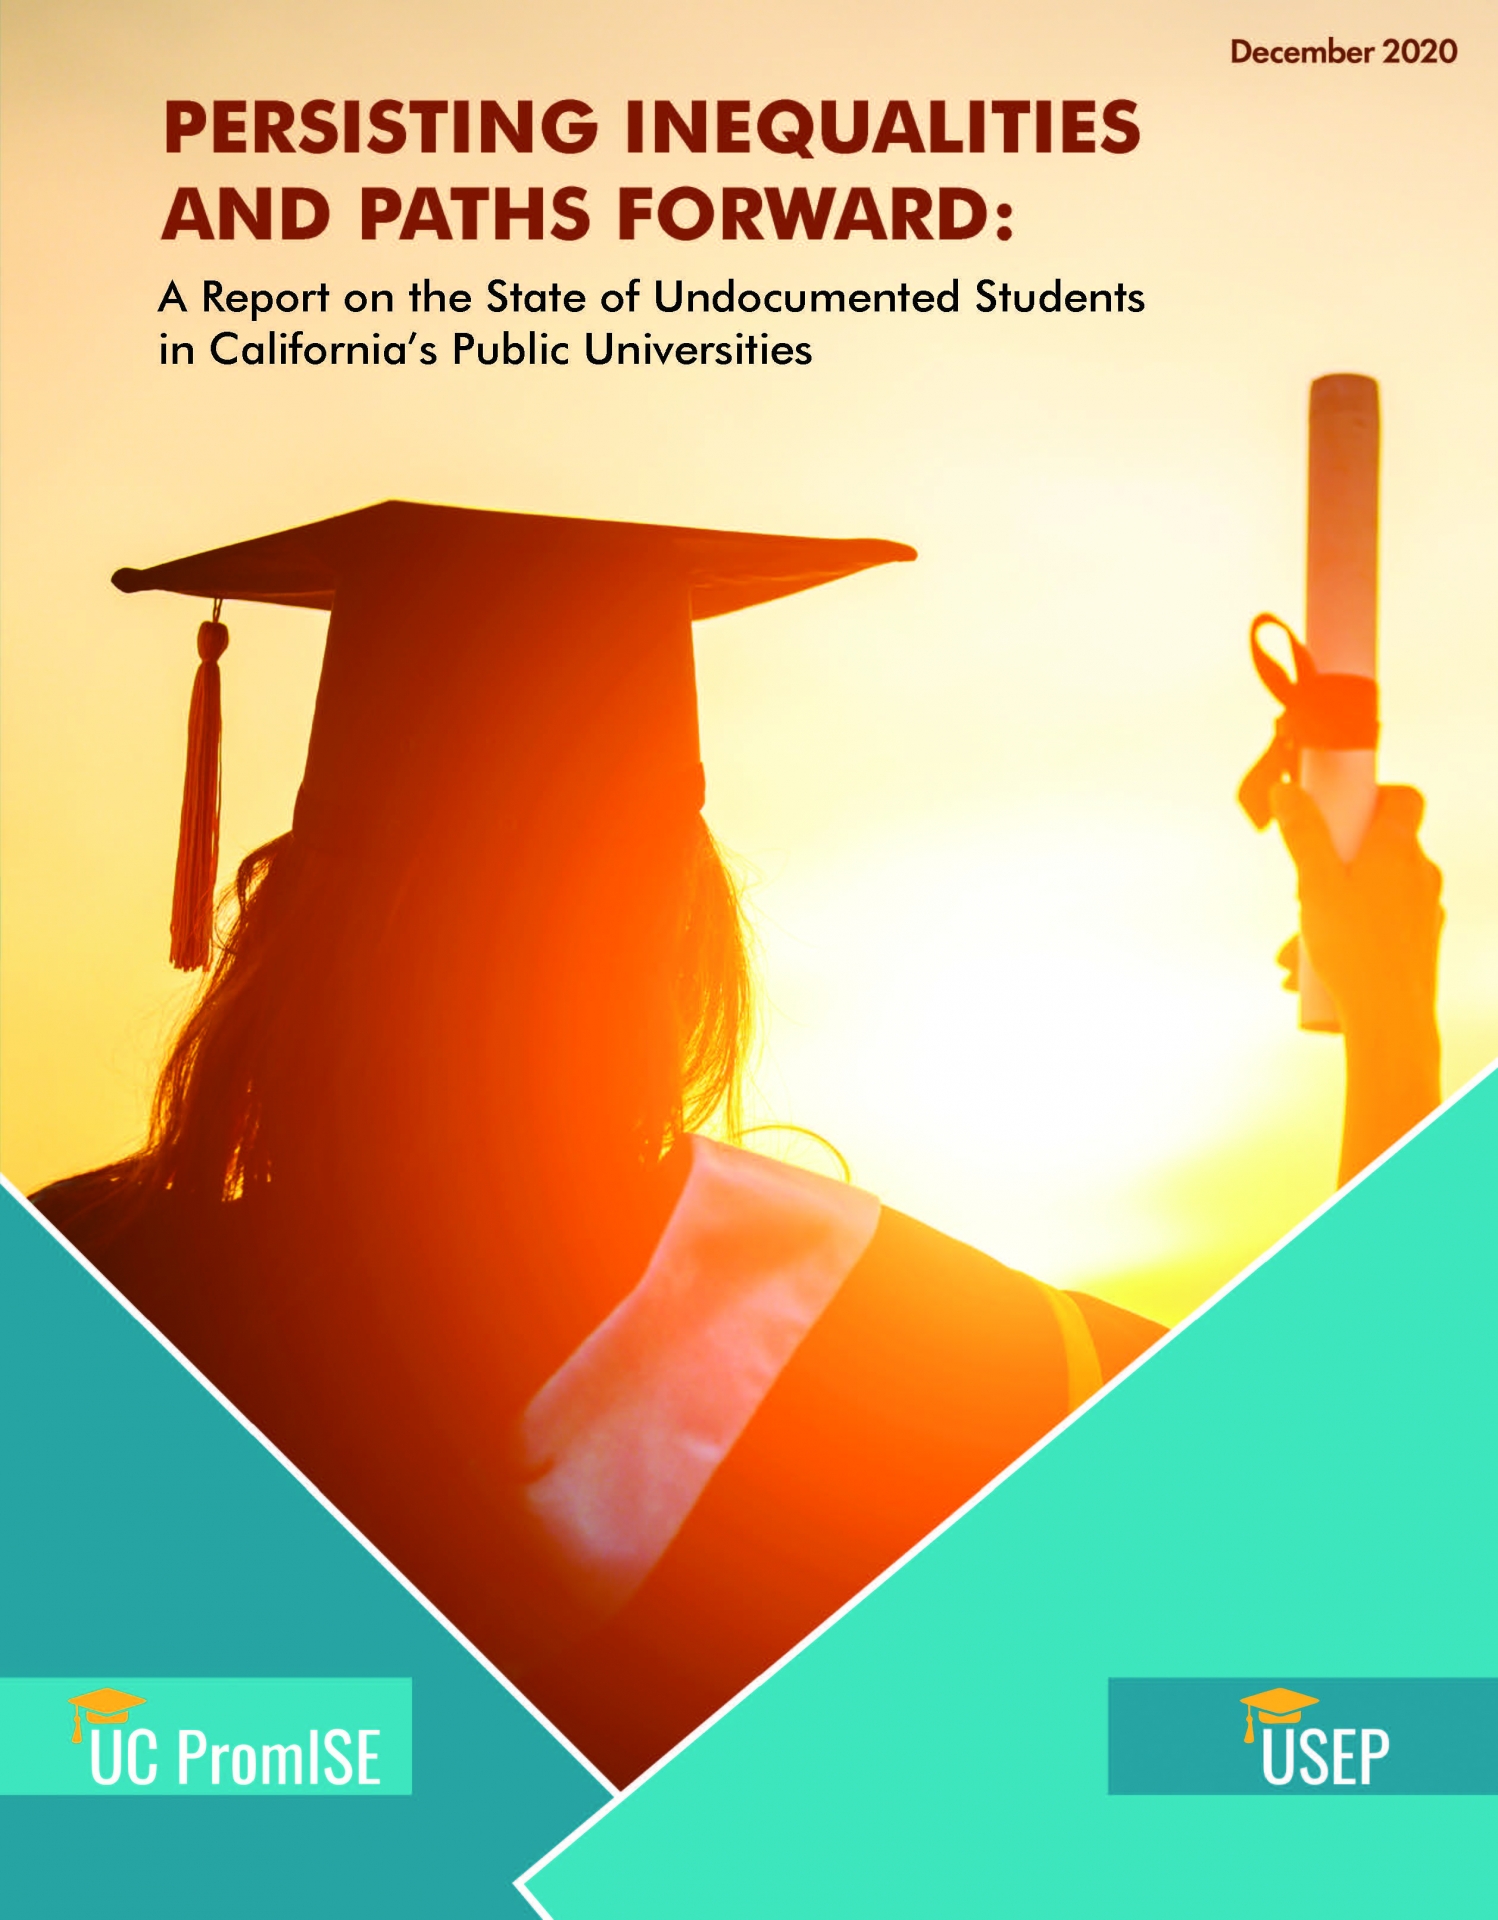 Persisting Inequalities and Paths Forward Report